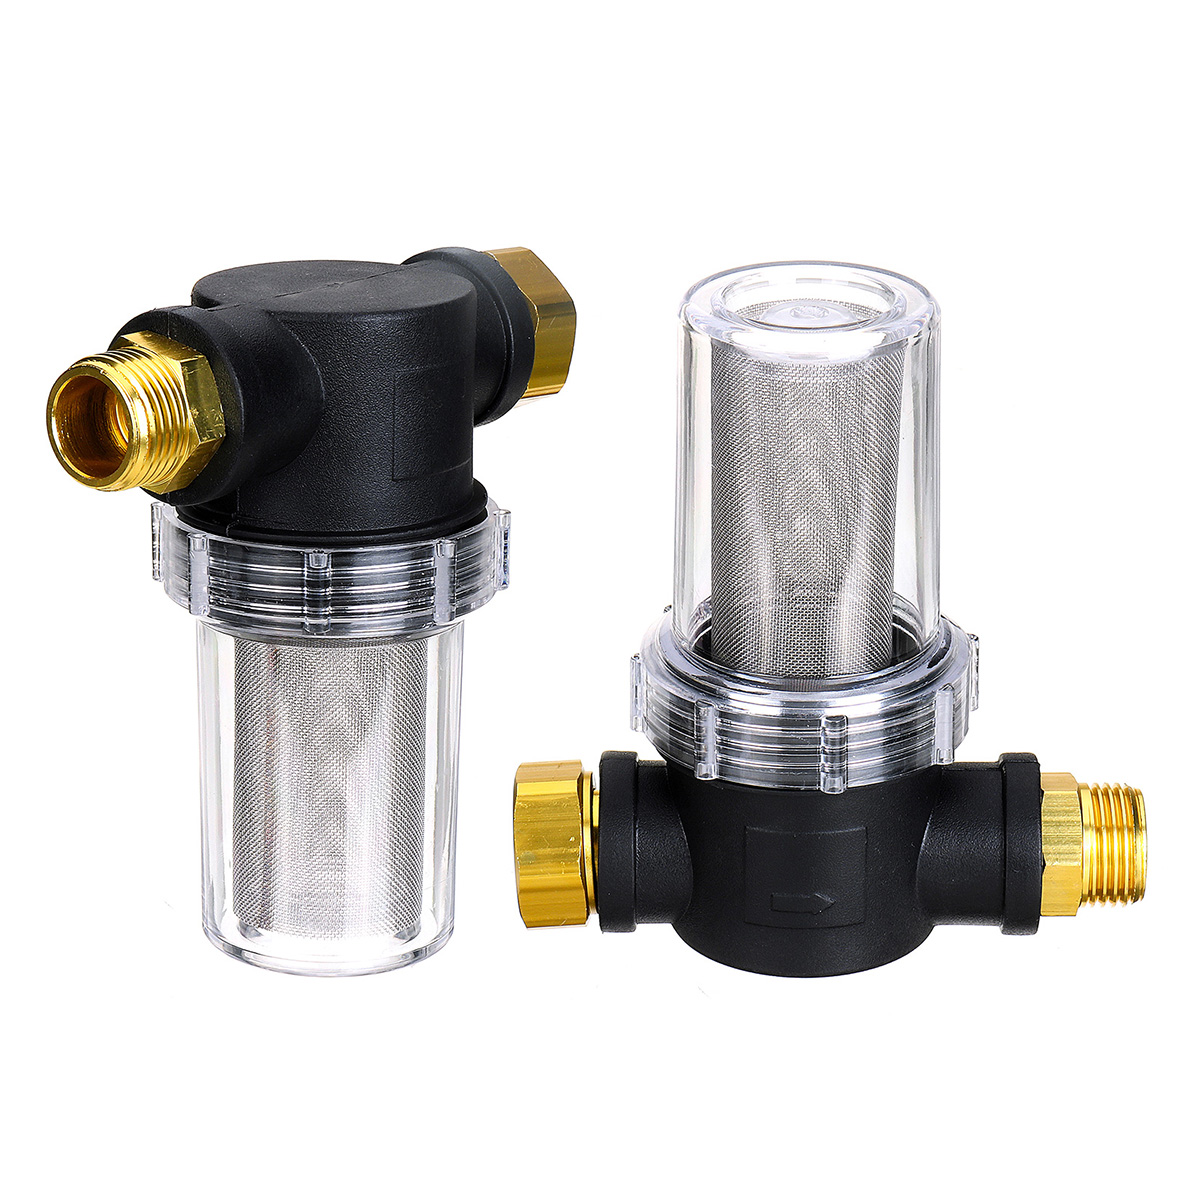 Garden-Hose-Inlet-Filter-Attachment-40-Mesh--100-Mesh-for-Pressure-Washers-34quot-1368441